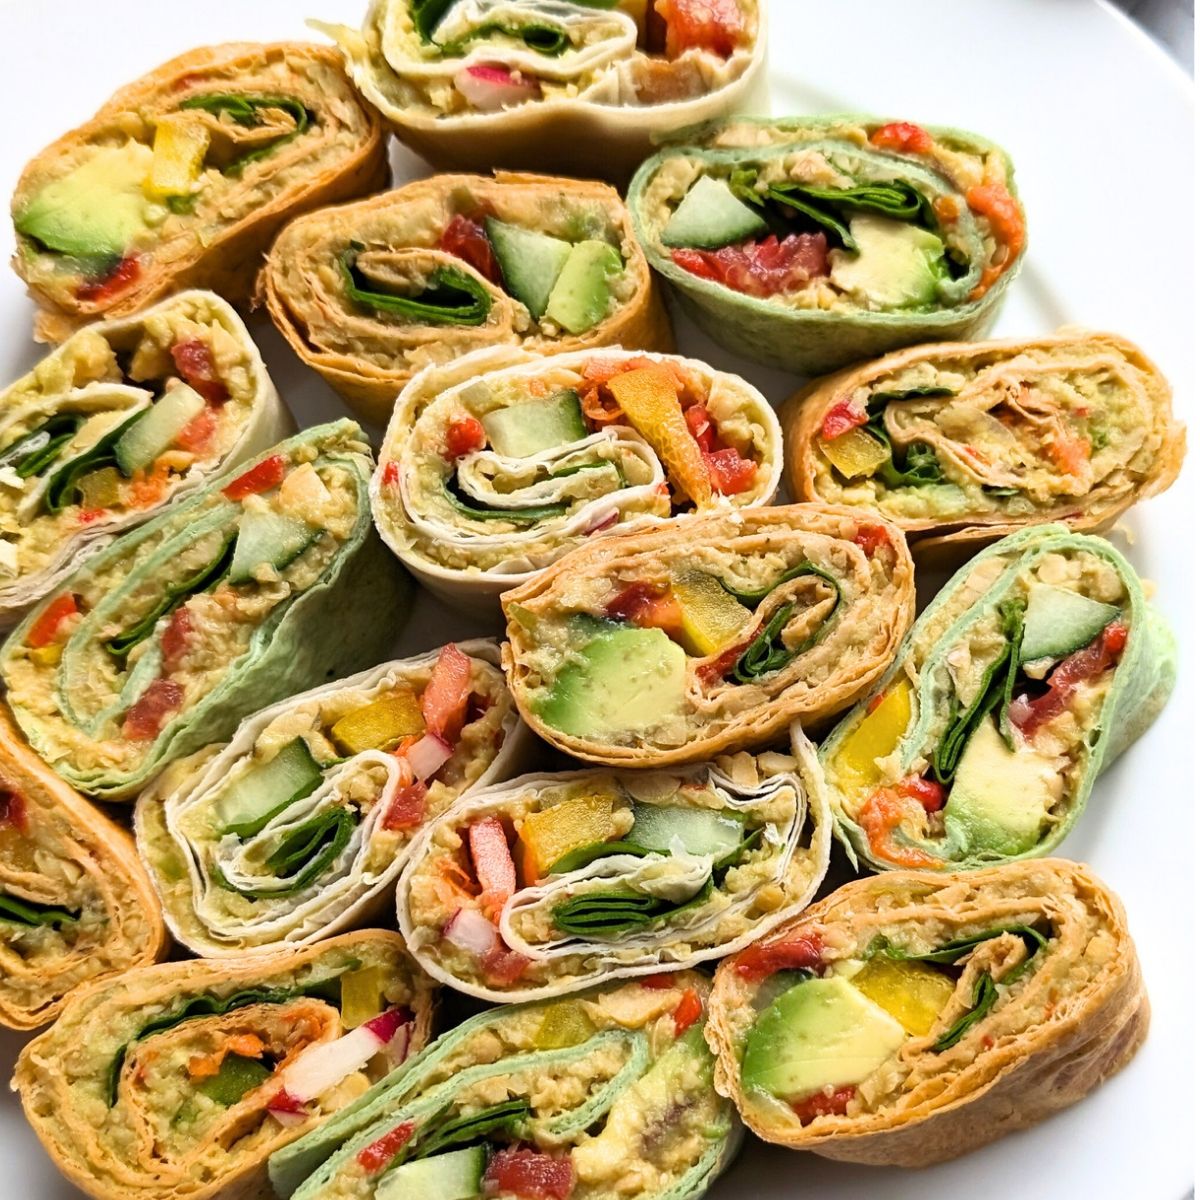 vegan pinwheels recipe with avocadoes chickpeas tomato and bell peppers